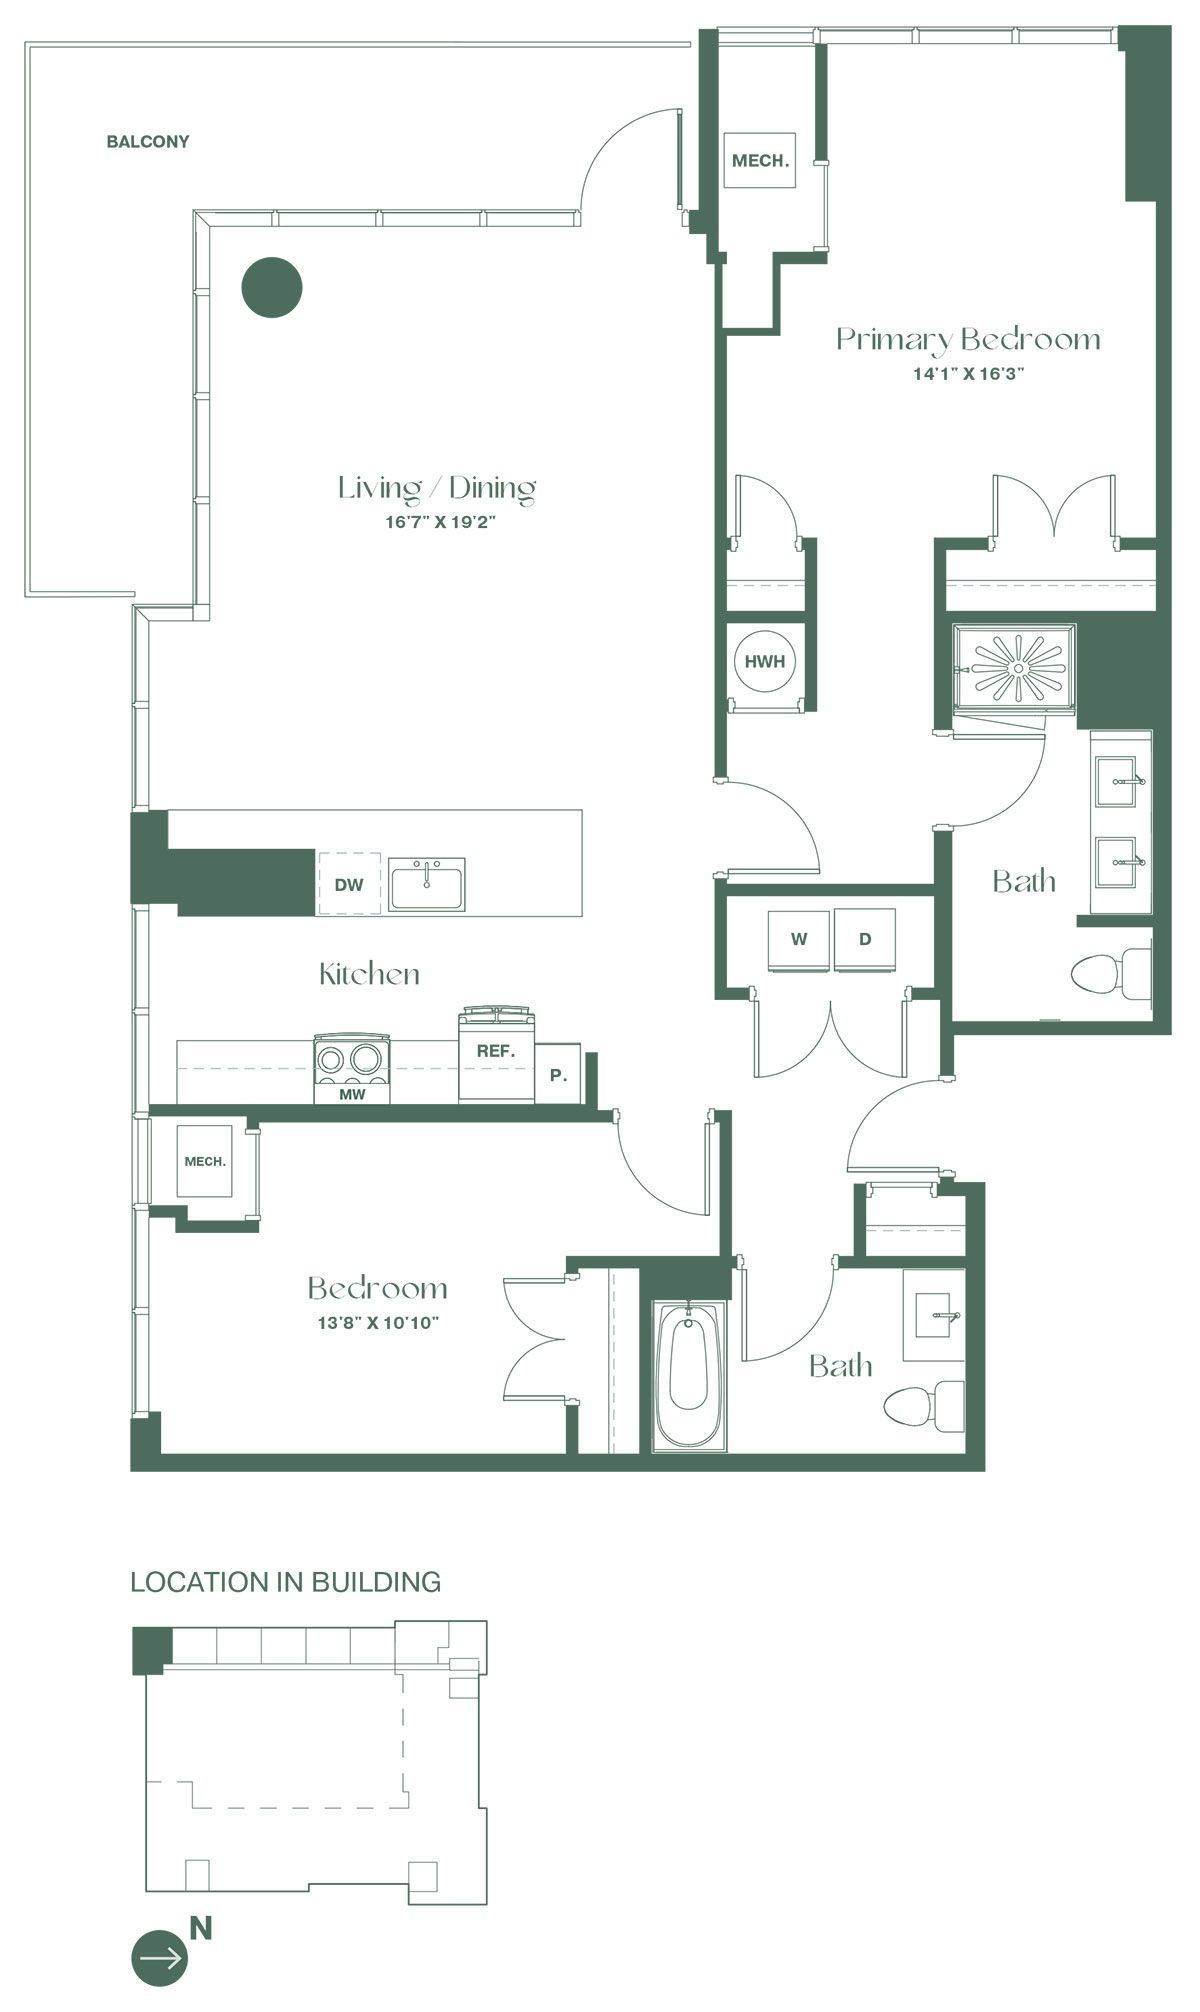 This floorplan for a two-bedroom, two-bathroom apartment at RVR at Xchange shows an entrance hallway, leading to a full bathroom and a bedroom. Continue on to the open kitchen with a dishwasher and kitchen island. Past the kitchen is a spacious living and dining room area with an expansive wrap around balcony, the entrance to the primary bedroom suite with full bathroom.